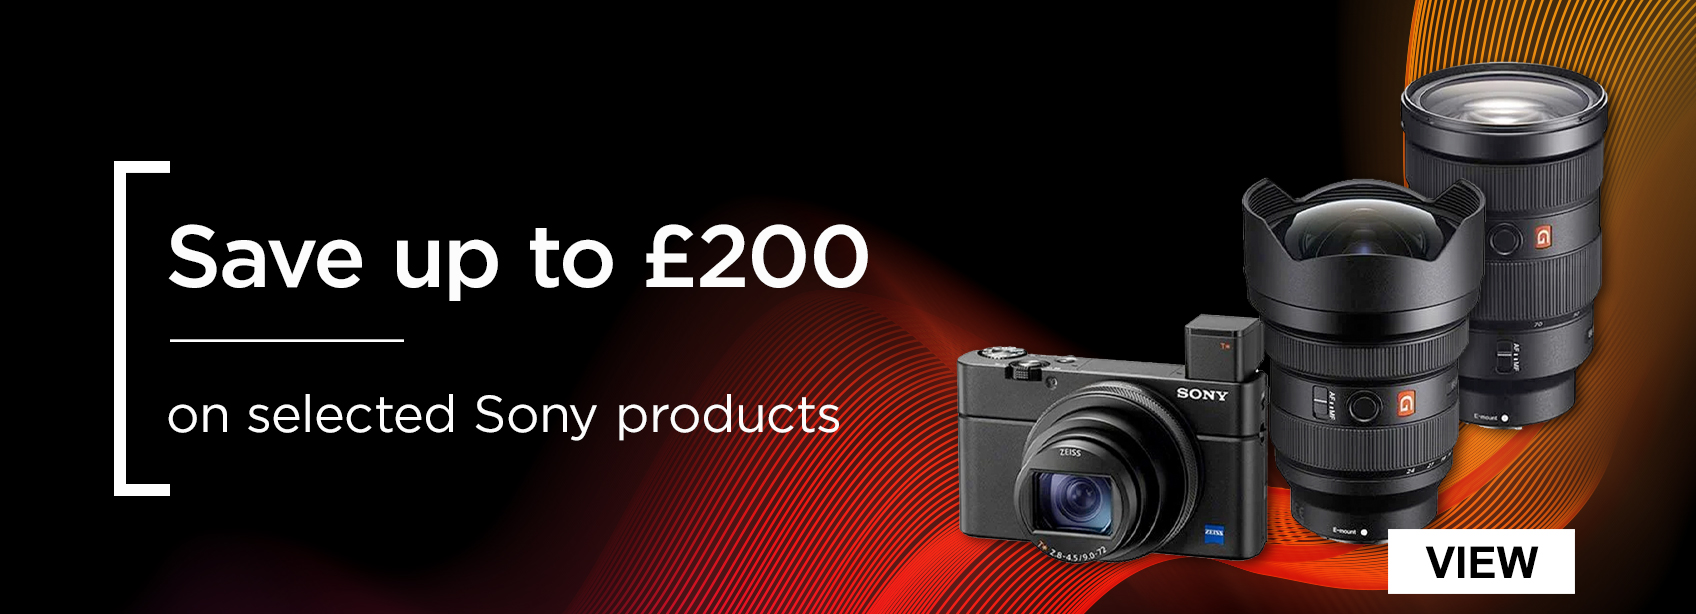 Save up to £200 on selected Sony products